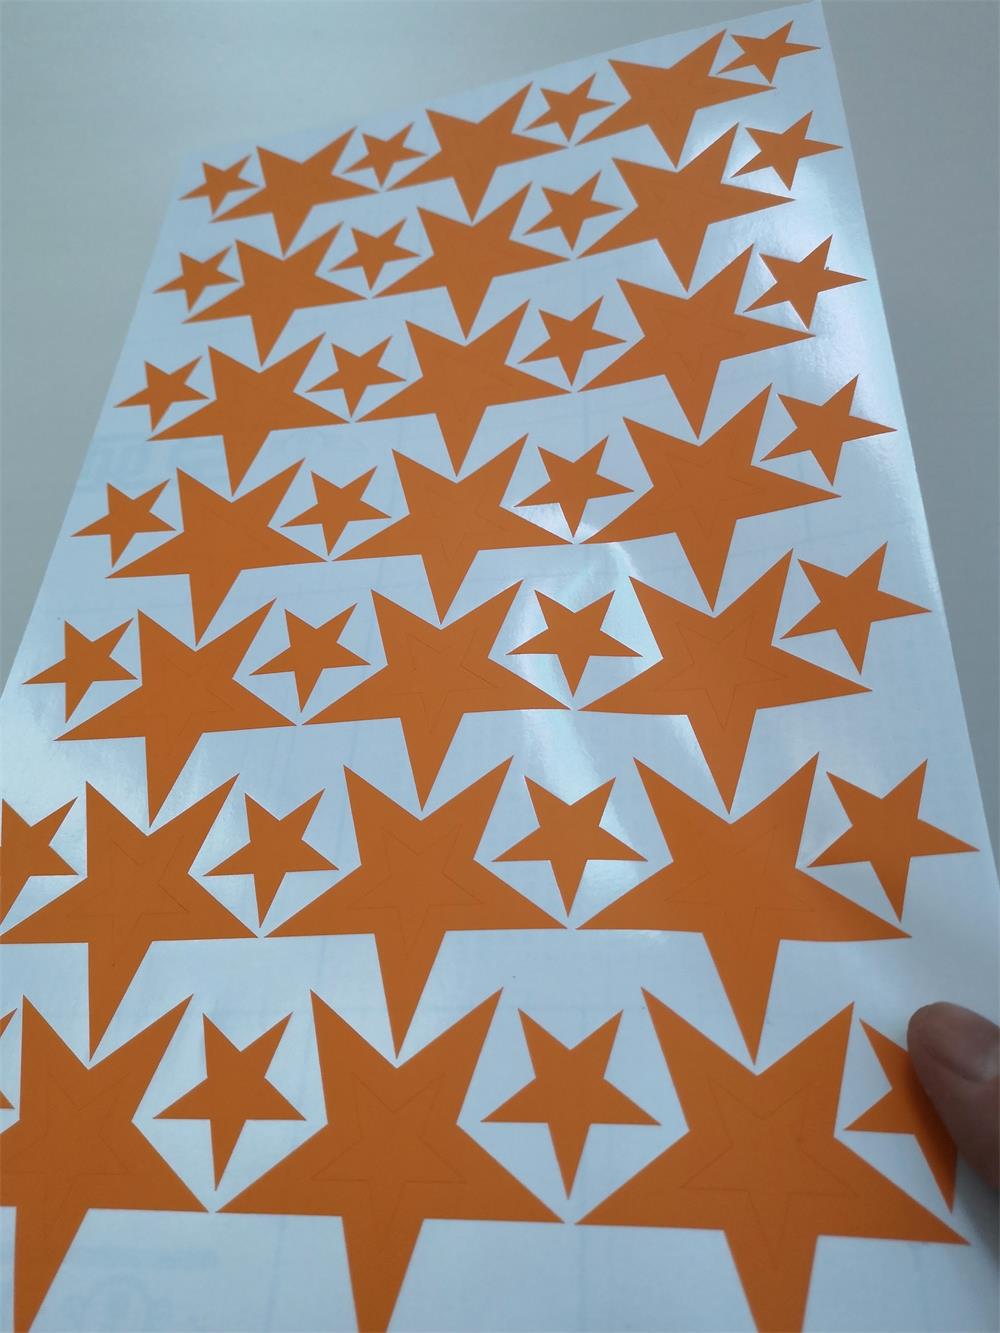 Hollow Stars Wall Sticker For Baby Nursery Rooms